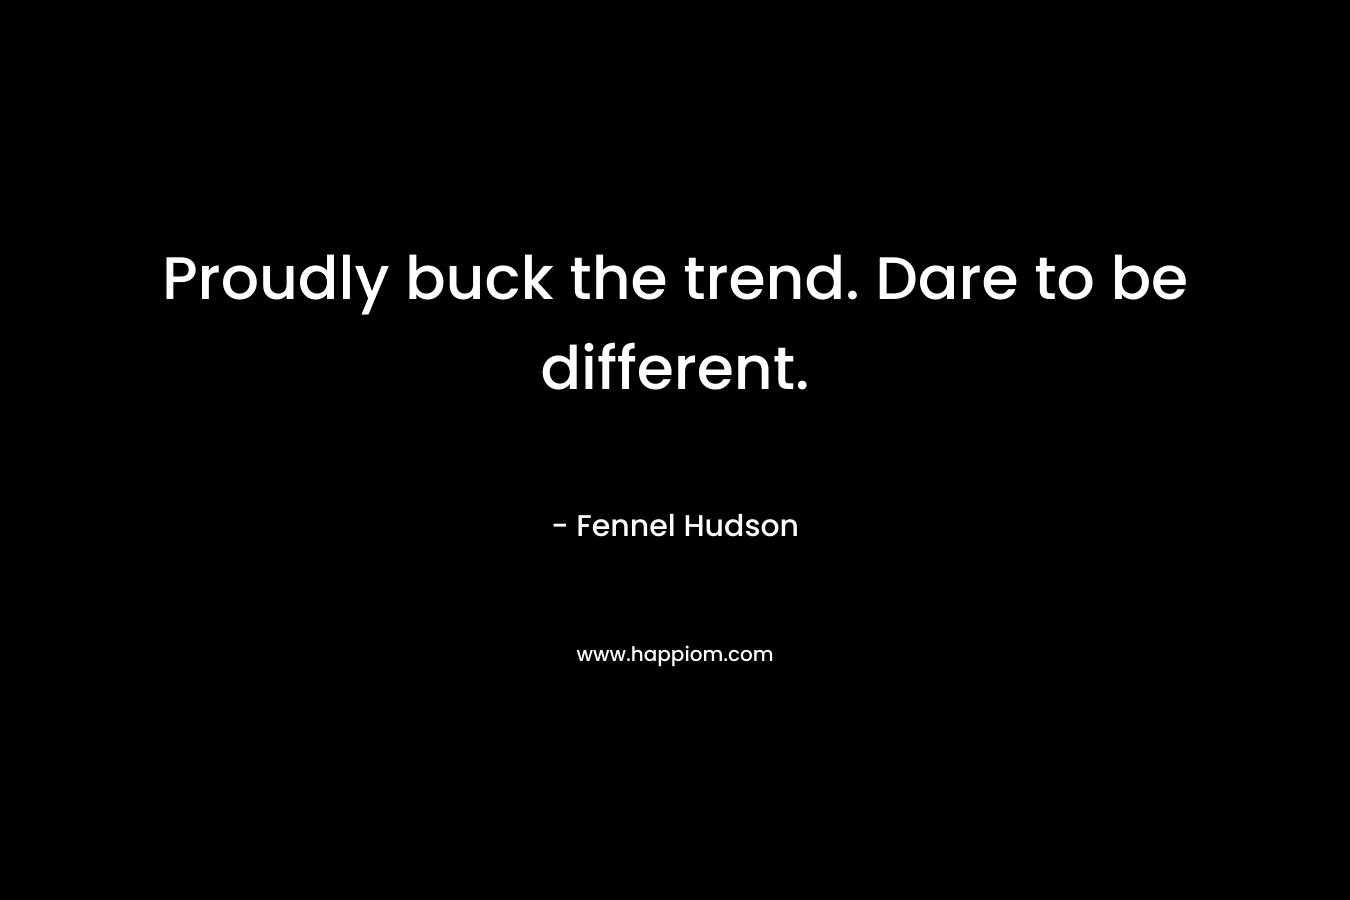 Proudly buck the trend. Dare to be different. – Fennel Hudson